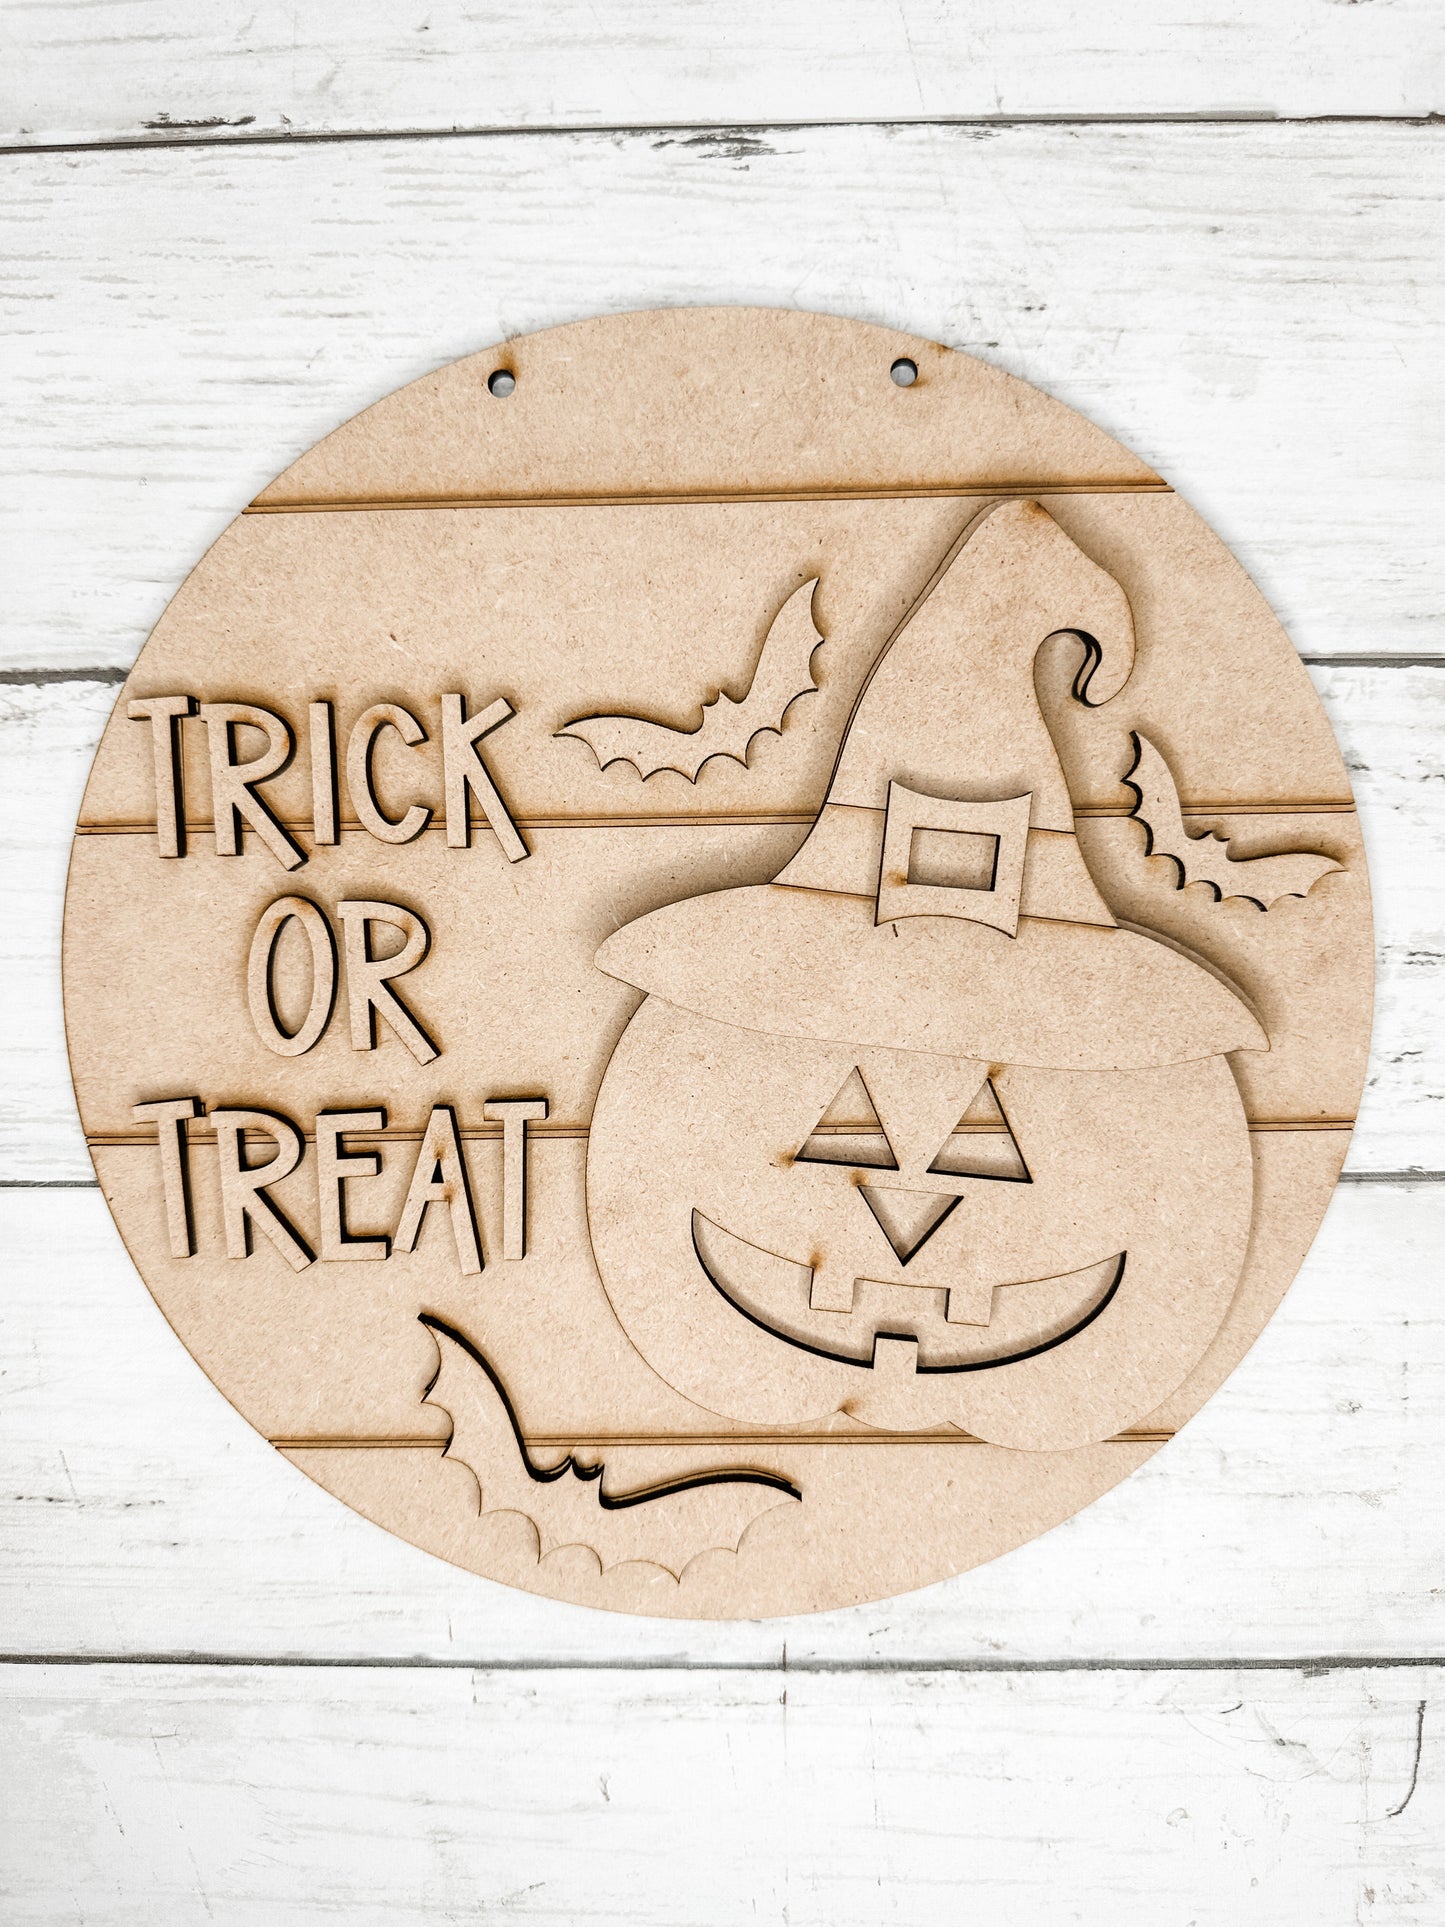 9 in round Halloween Trick Or Treat Sign DIY Kit